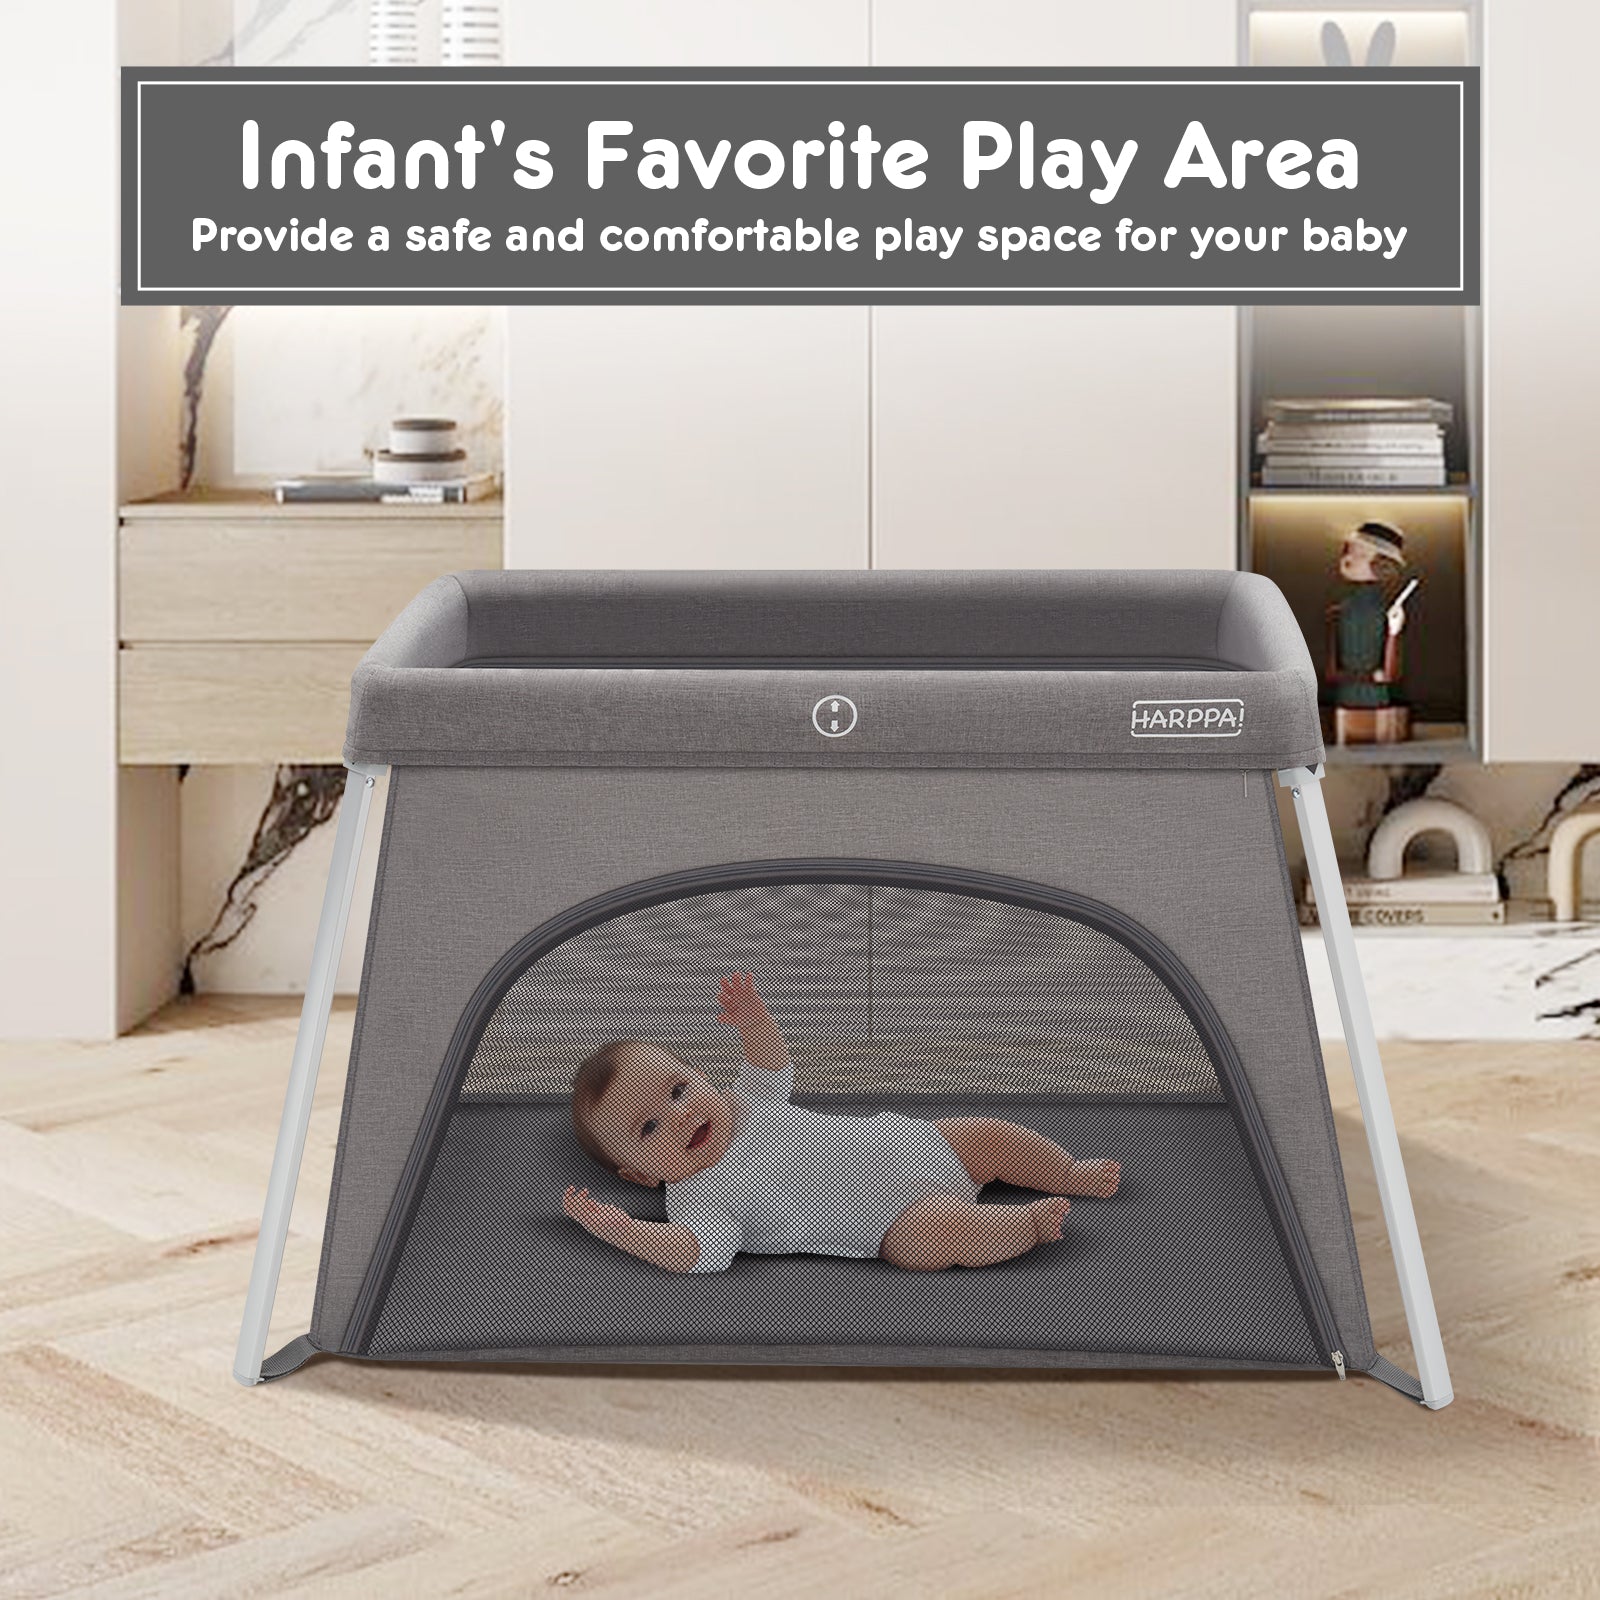 HARPPA Pack n Play Travel Playard - Lightweight & Foldable, Easy Transport Travel Crib with Comfortable Mattress for Infants to Toddlers